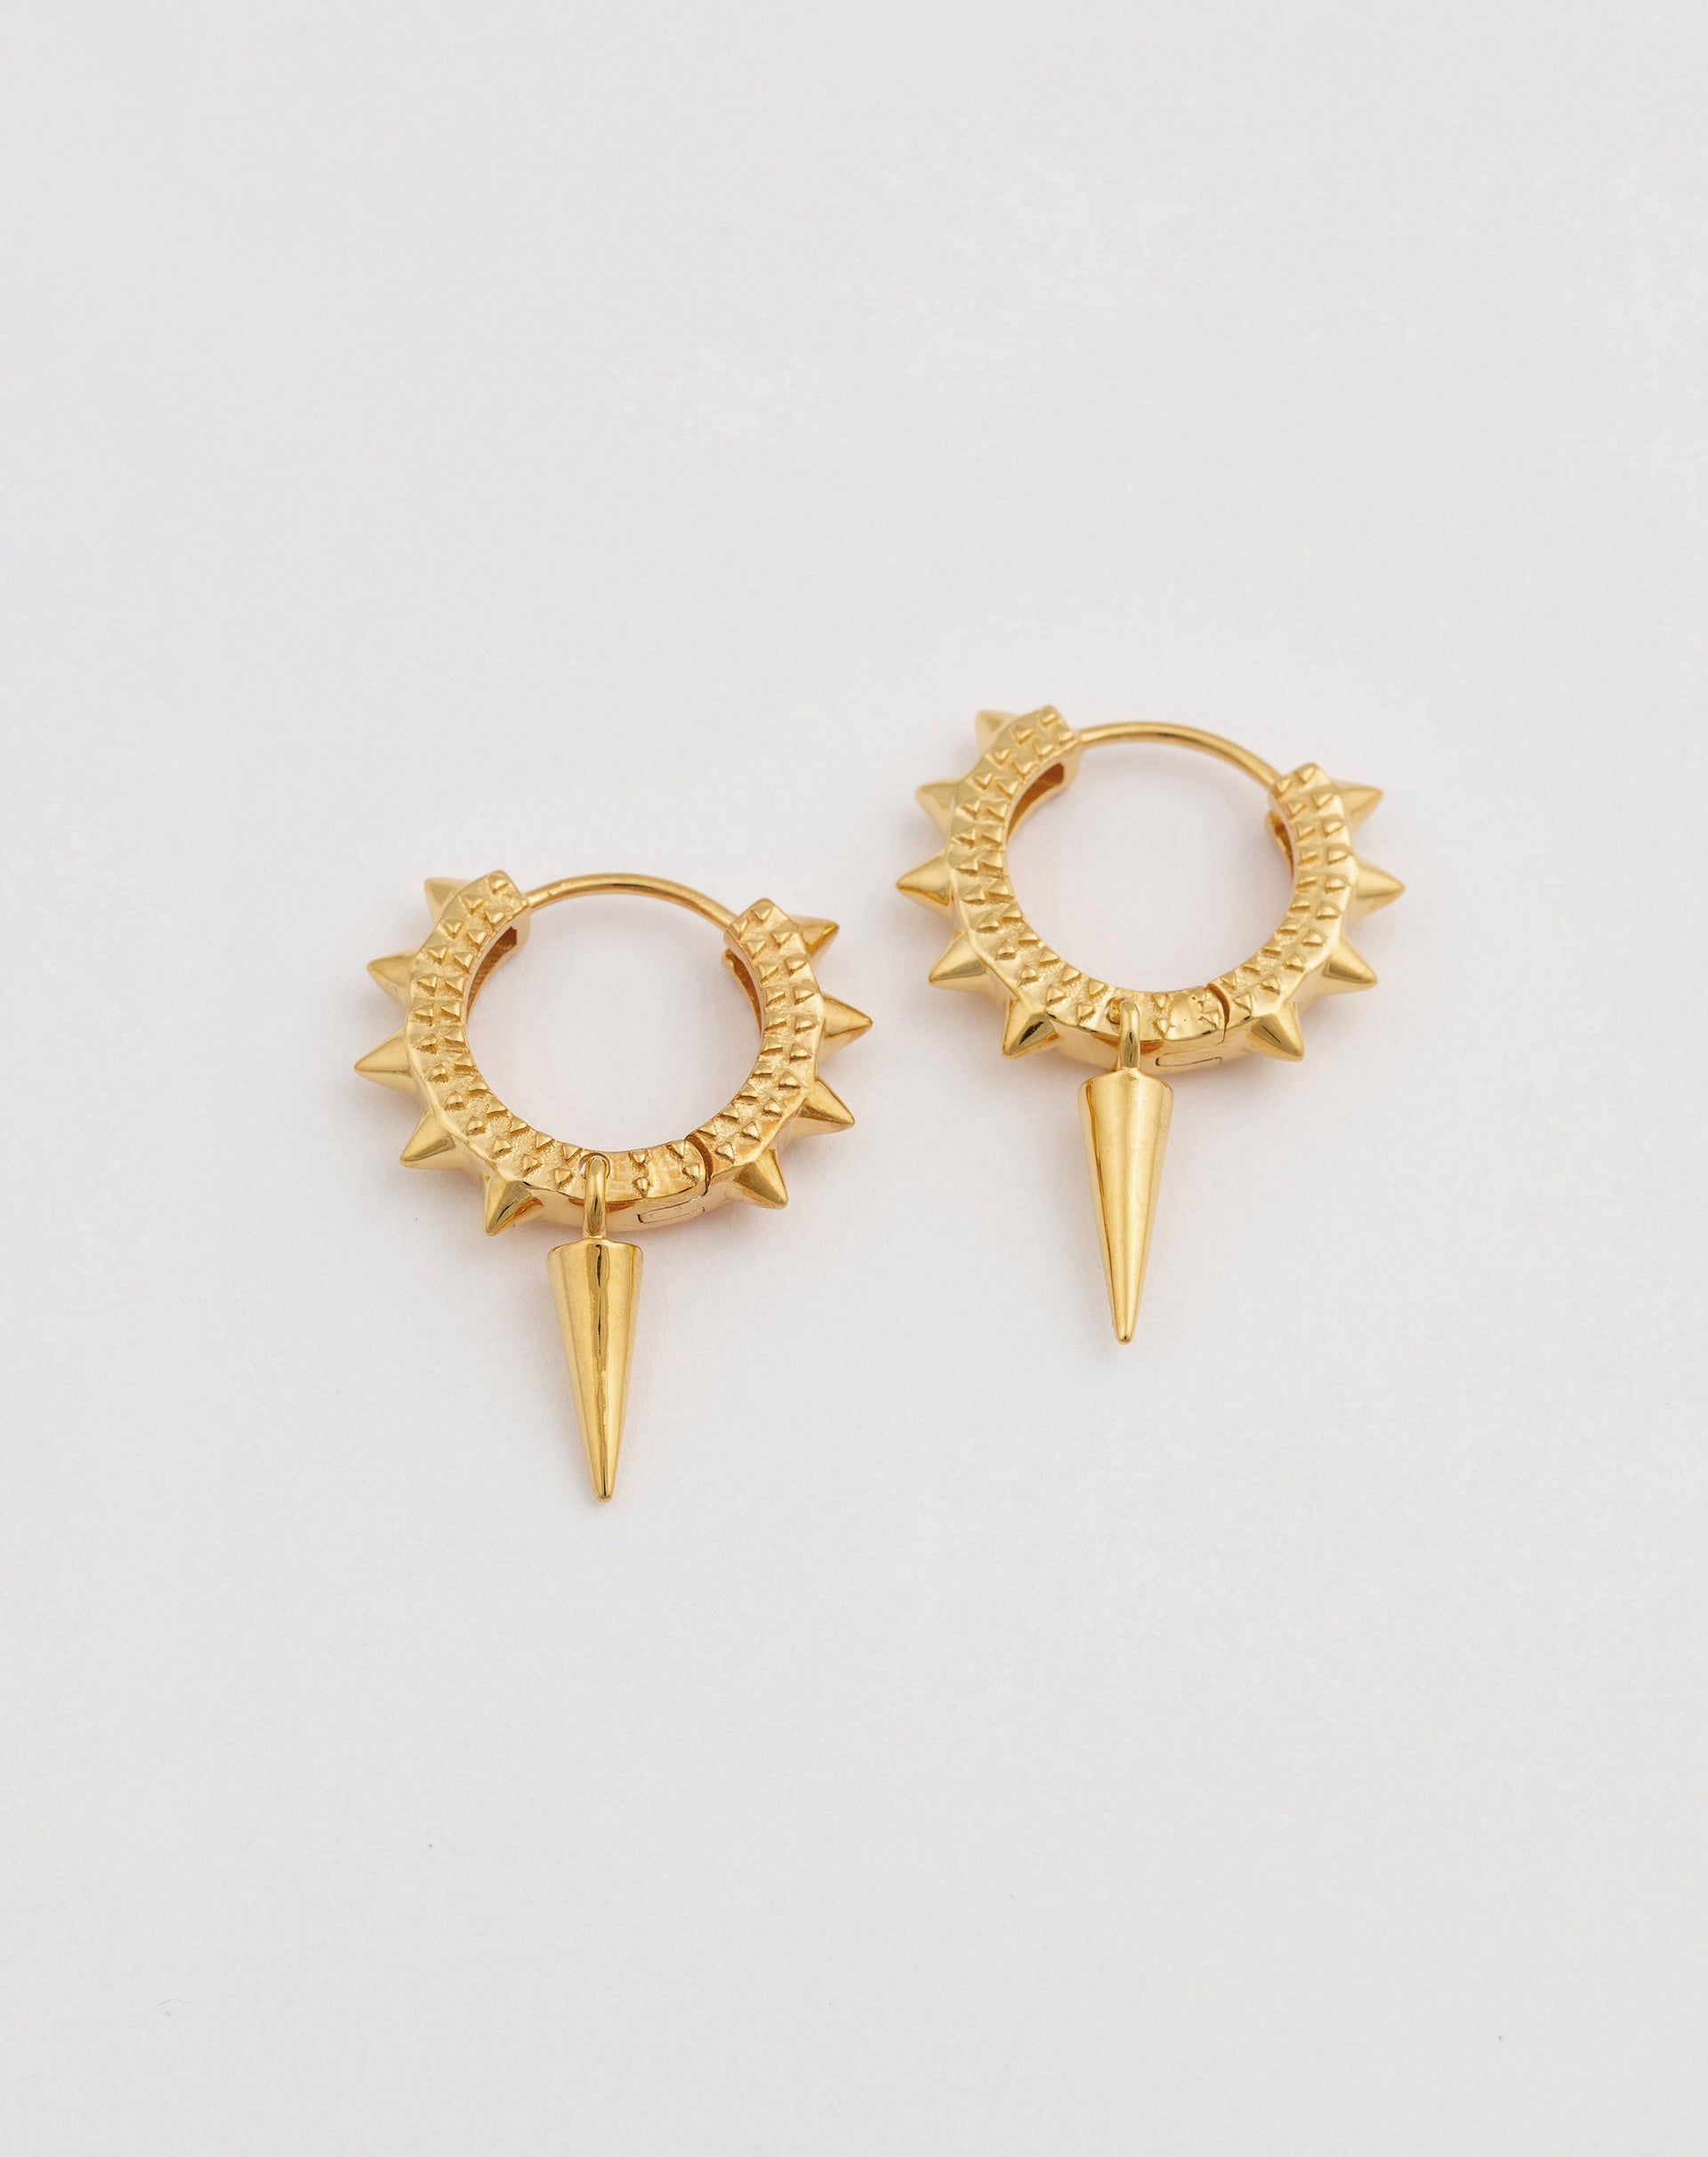 Gold earrings with textured sides and spike detailing